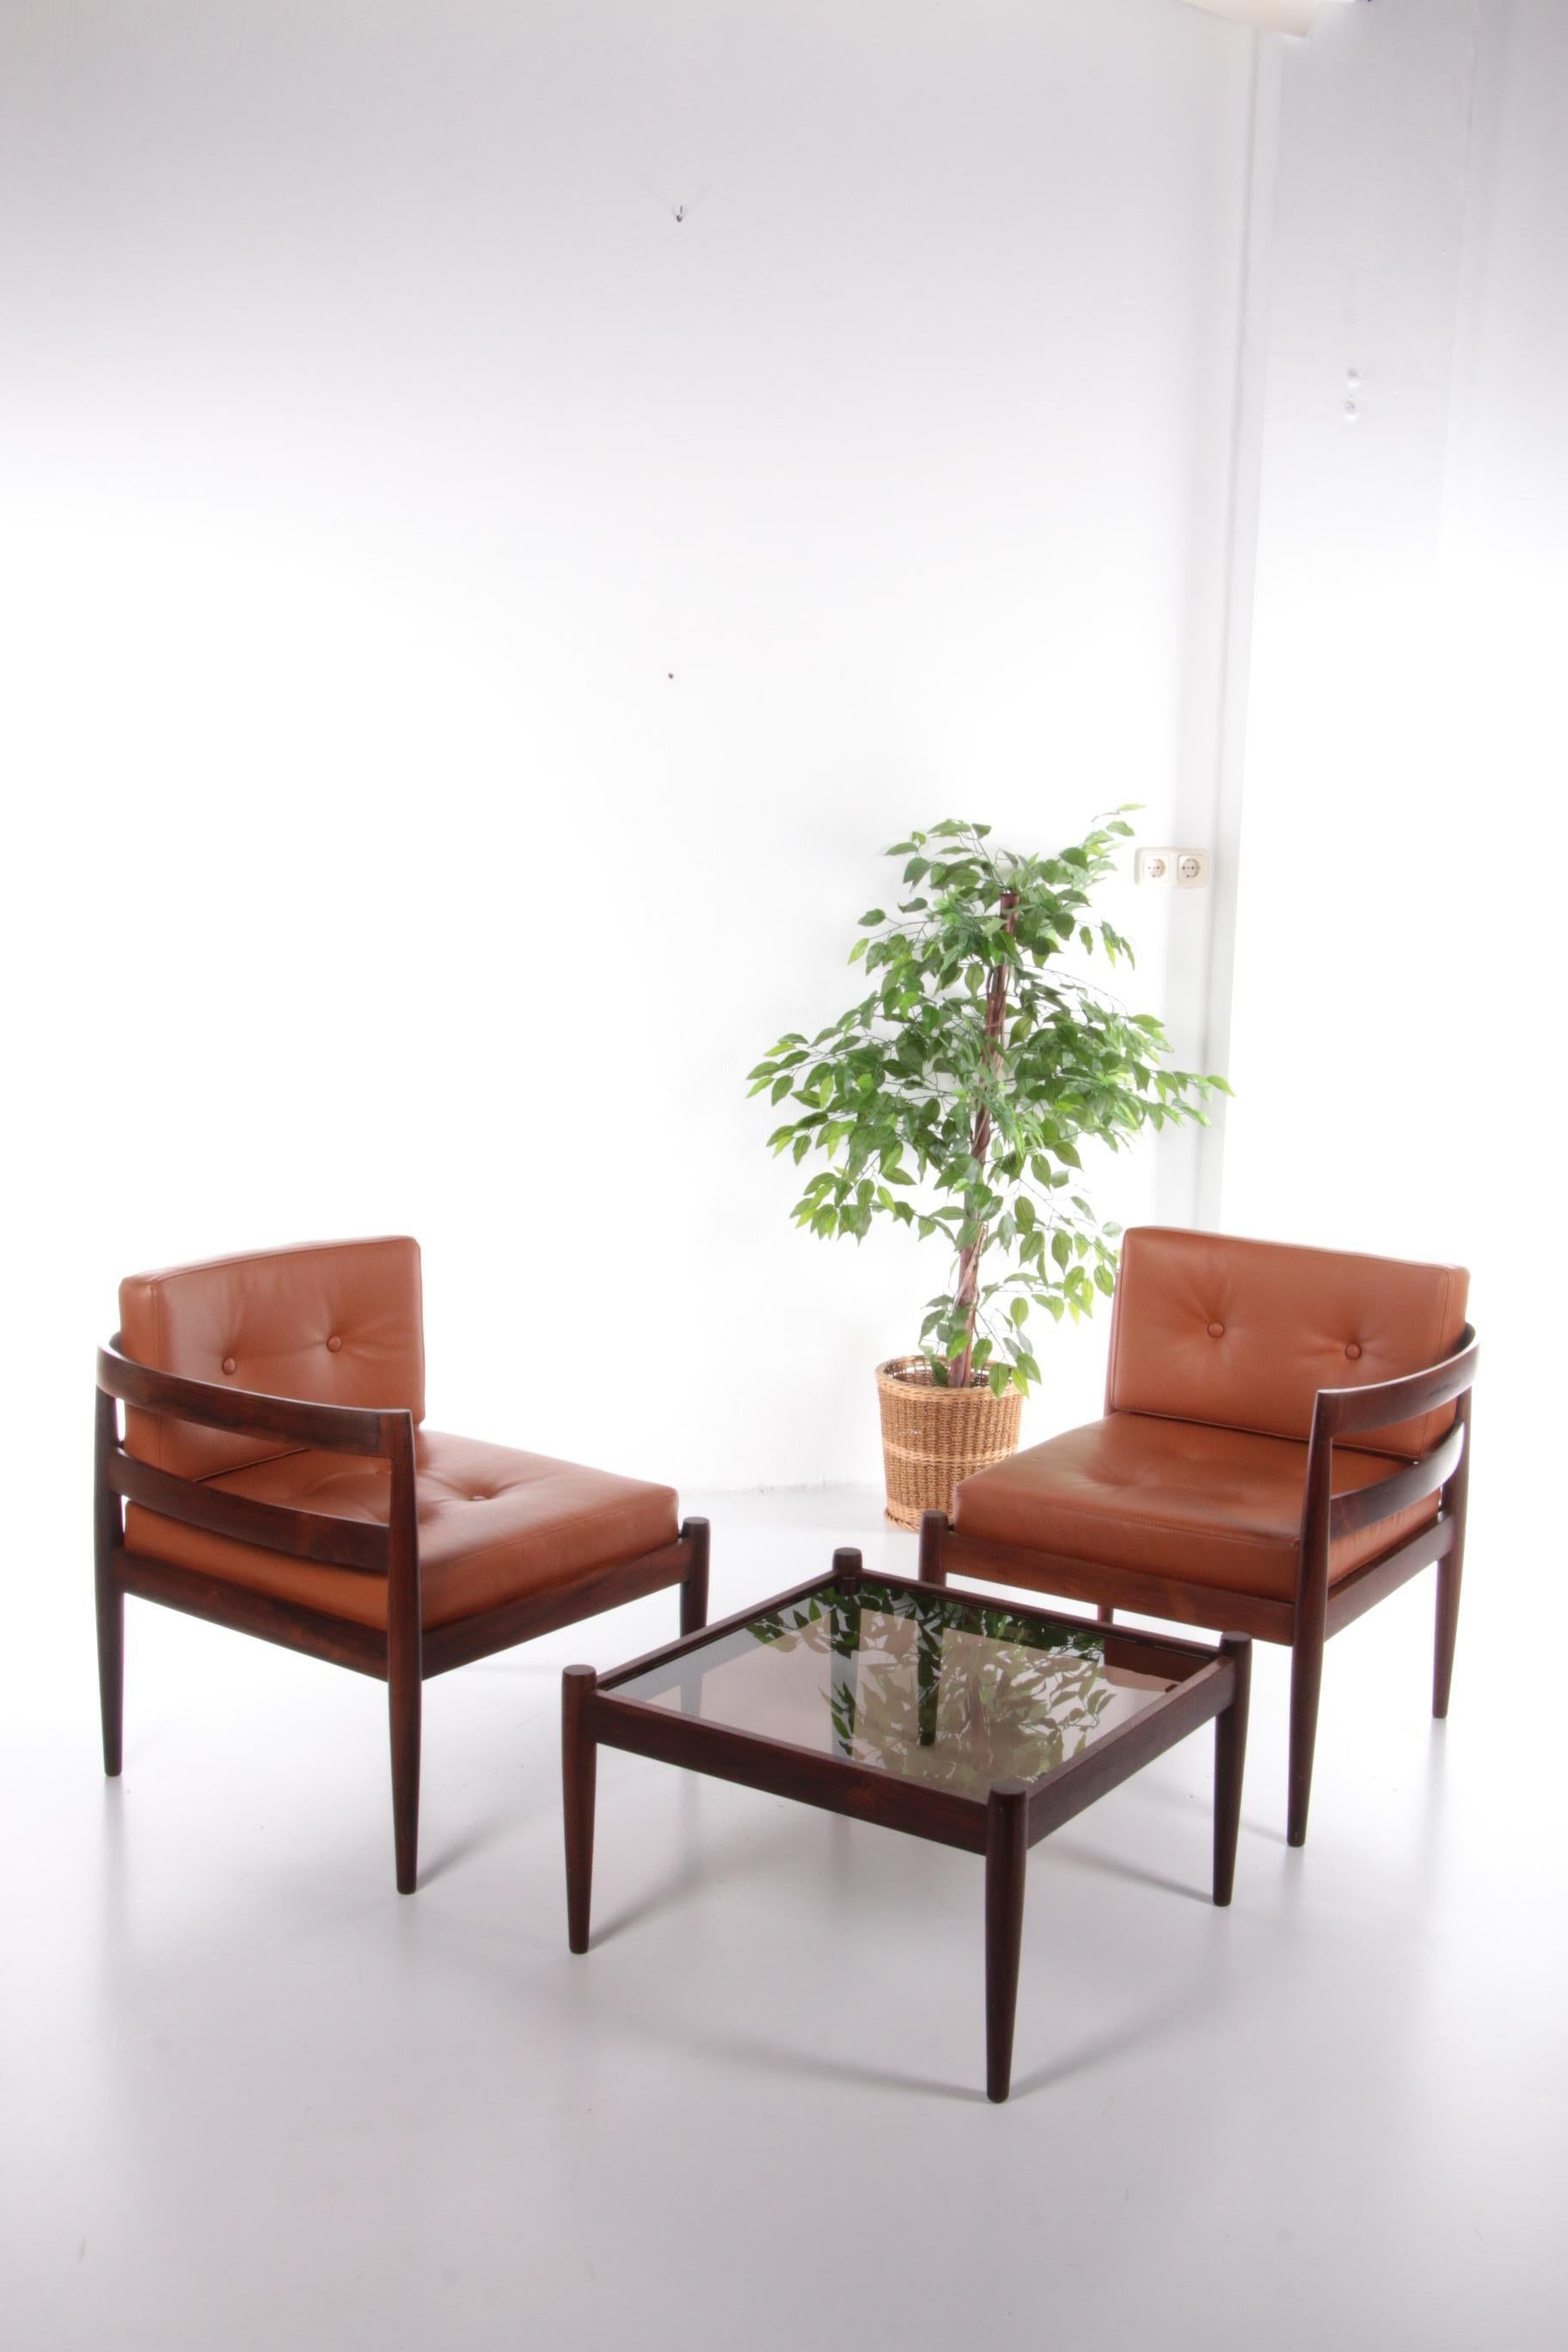 Kai Kristiansen Lounge set Model Universe by Magnus Olesen, 1960 Denmark

An iconic three piece modular unit of Kai Kristiansen's model universe chairs in beautiful Brazilian darkwood and original cognac color leather upholstery.

Designed in 1966